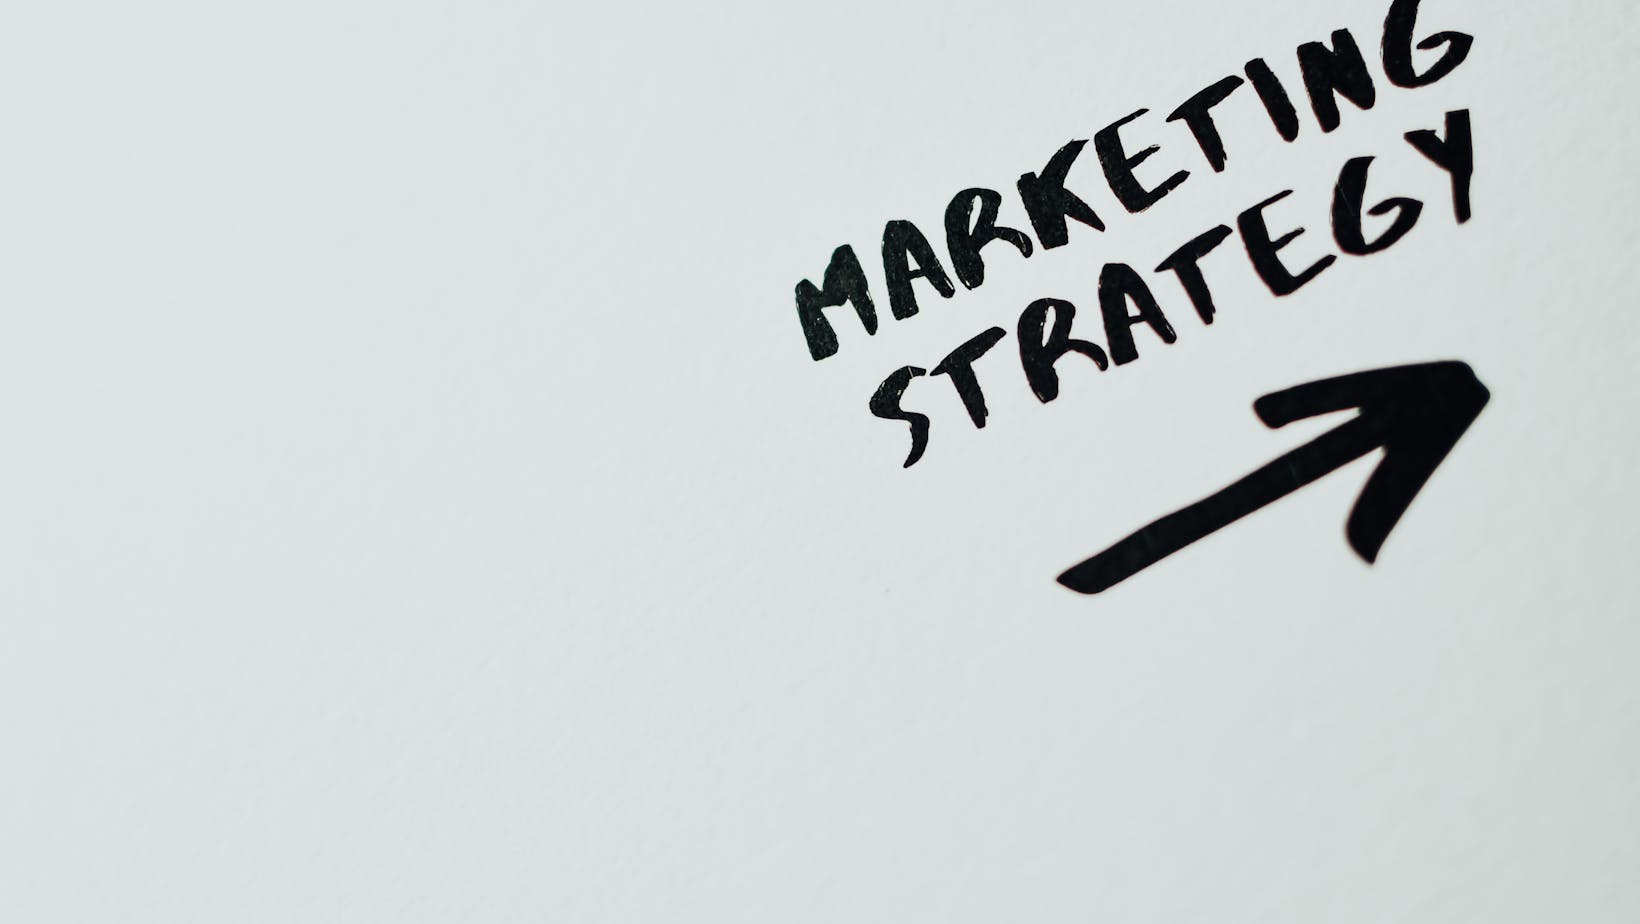 what is the last step of the 10 strategic and tactical considerations of sport marketing?